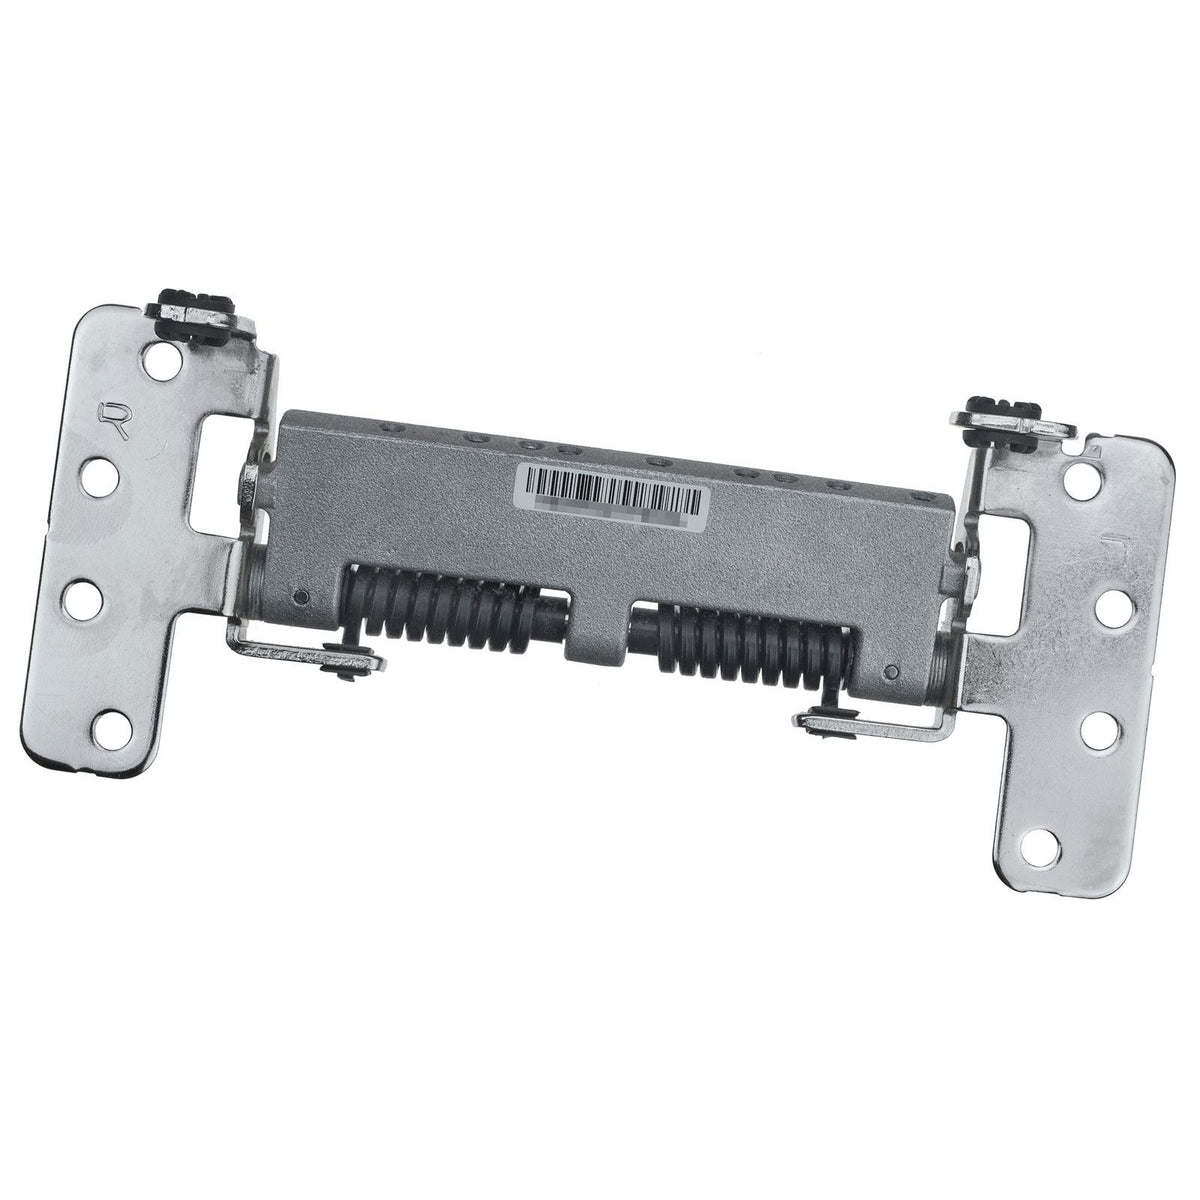 DISPLAY HINGE CLUTCH MECHANISM (DHCM) FOR IMAC 21.5" A1311 (LATE 2009 - LATE 2011)